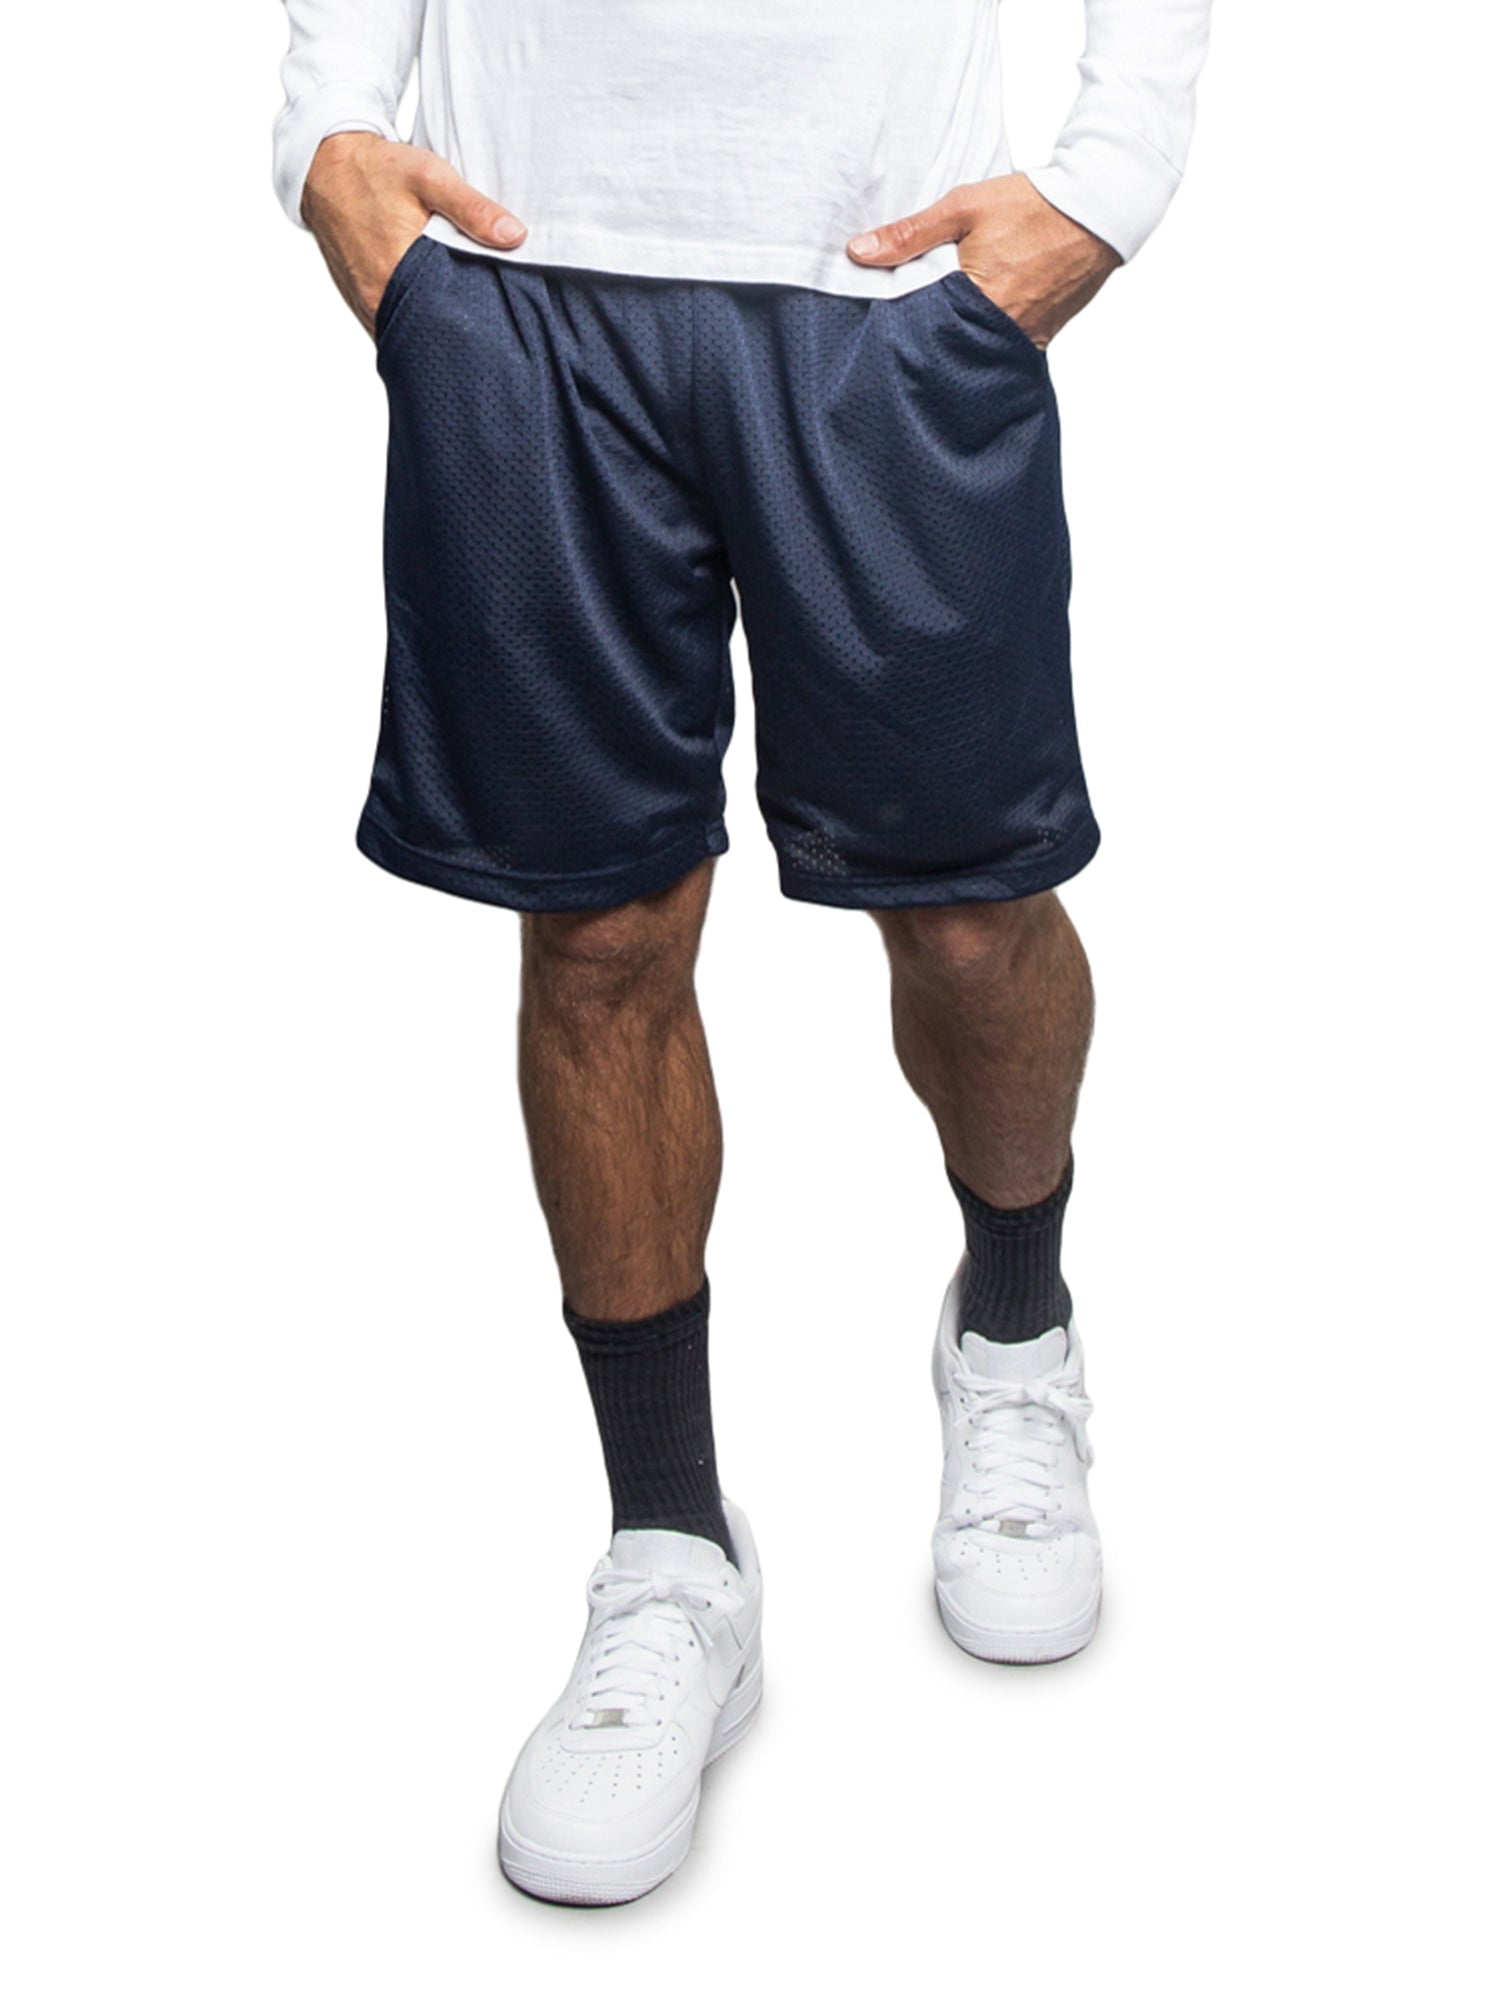 Everlast Mens Basketball Shorts Pants Trousers Bottoms Breathable Mesh Loose Fit Navy/White XXL 